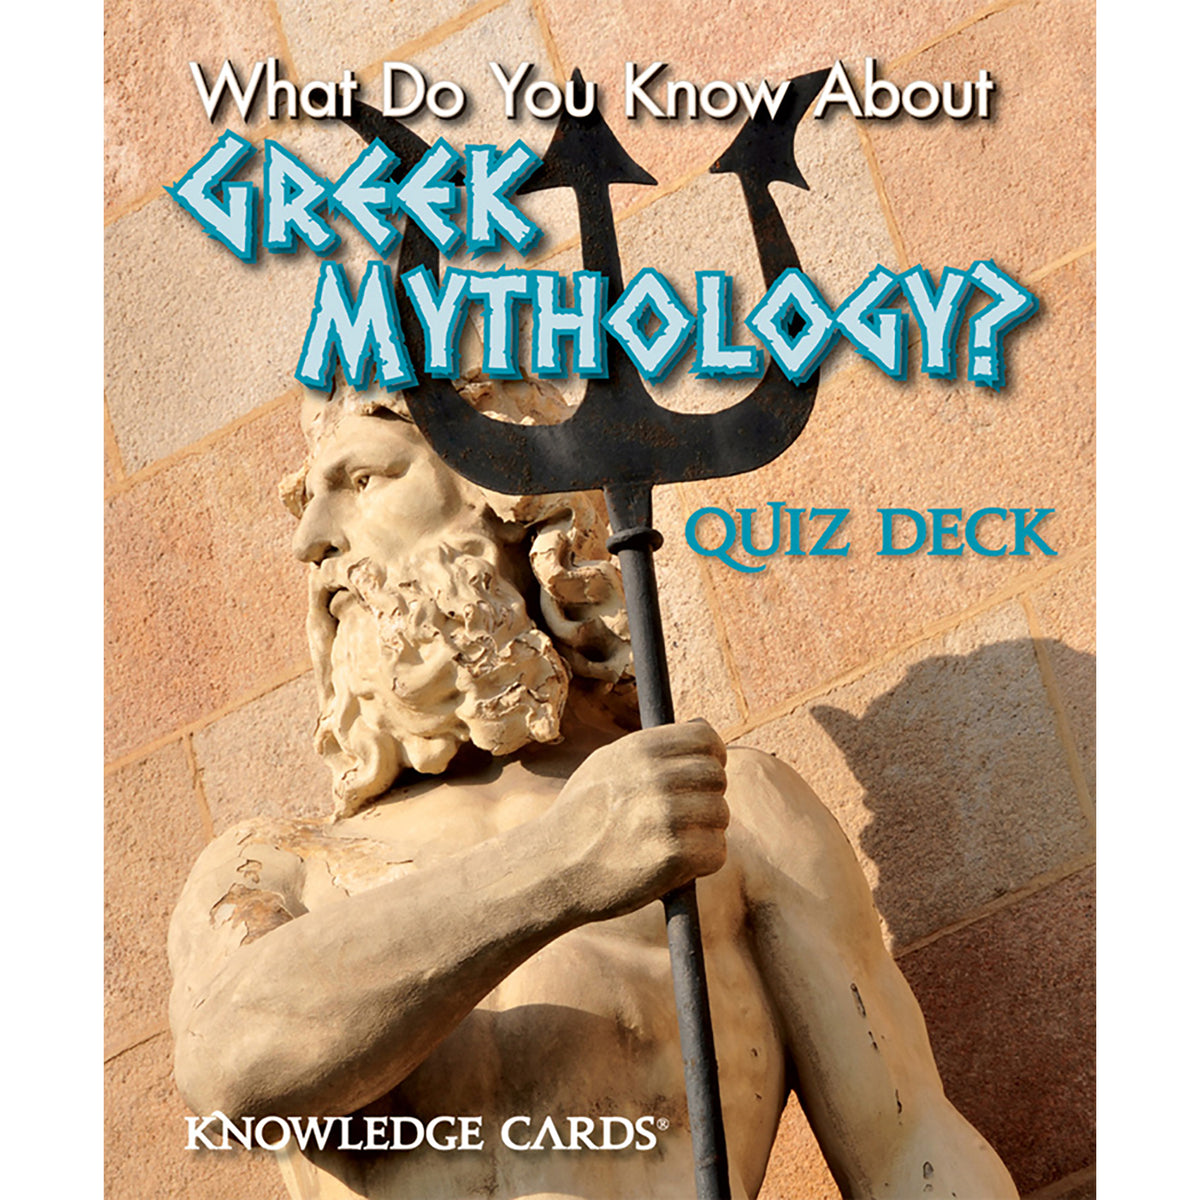 What Do You Know About Greek Mythology? Quiz Deck